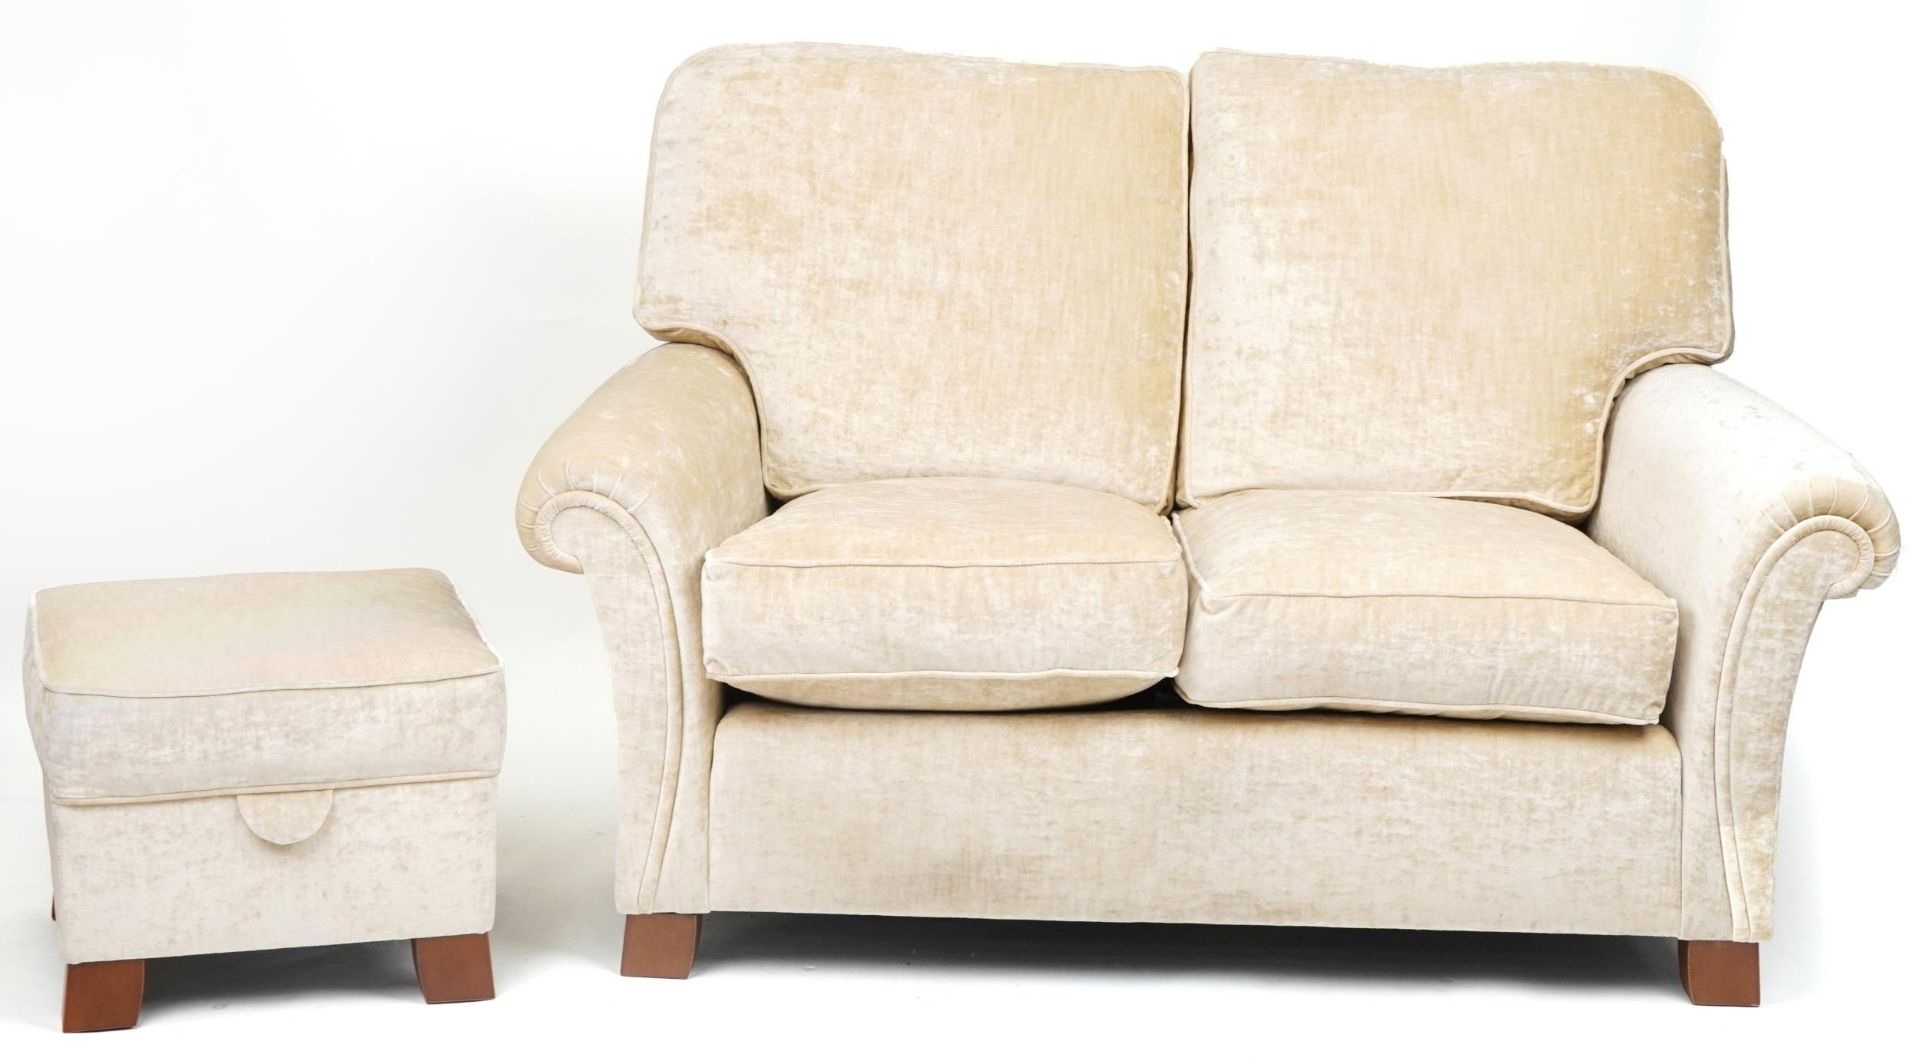 Contemporary beige upholstered two seater settee with matching footstool, 100cm H x 145cm W x - Image 2 of 4